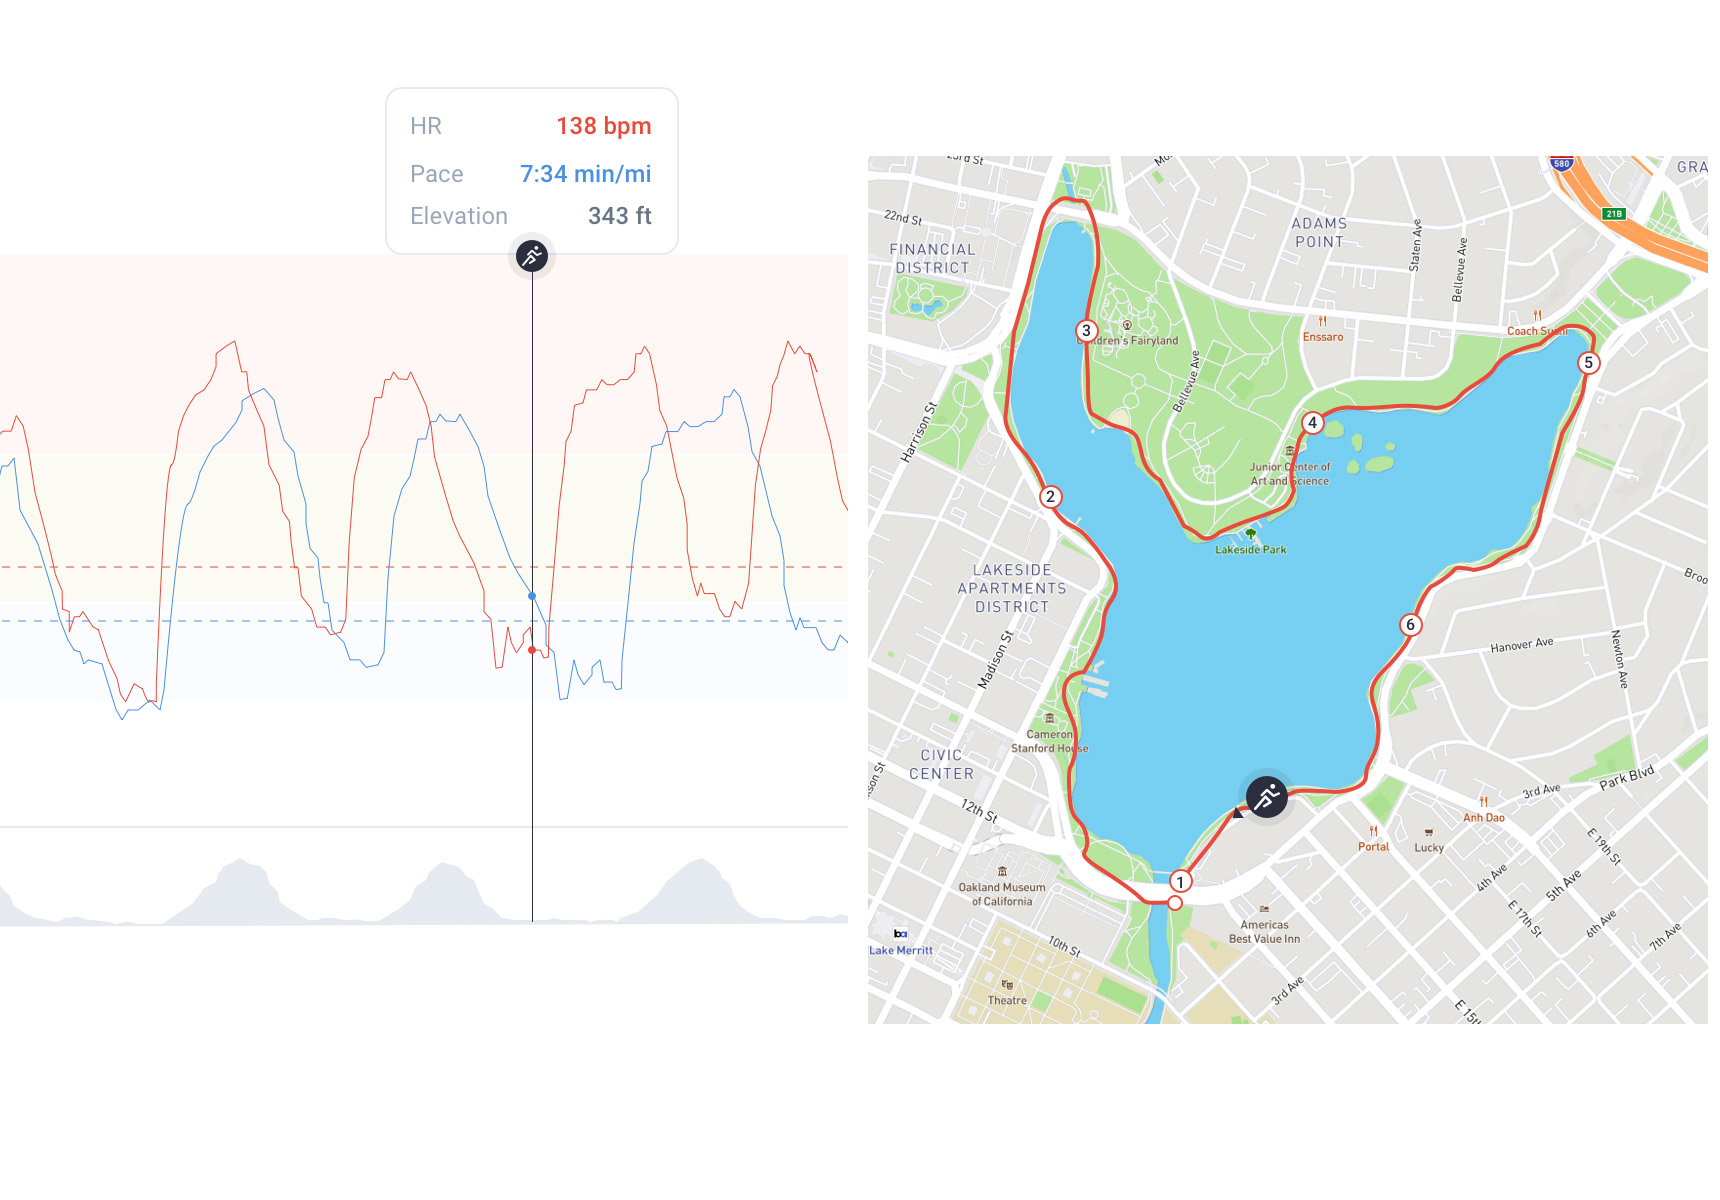 GPS map and chart data displaying pace, elevation and heart rate